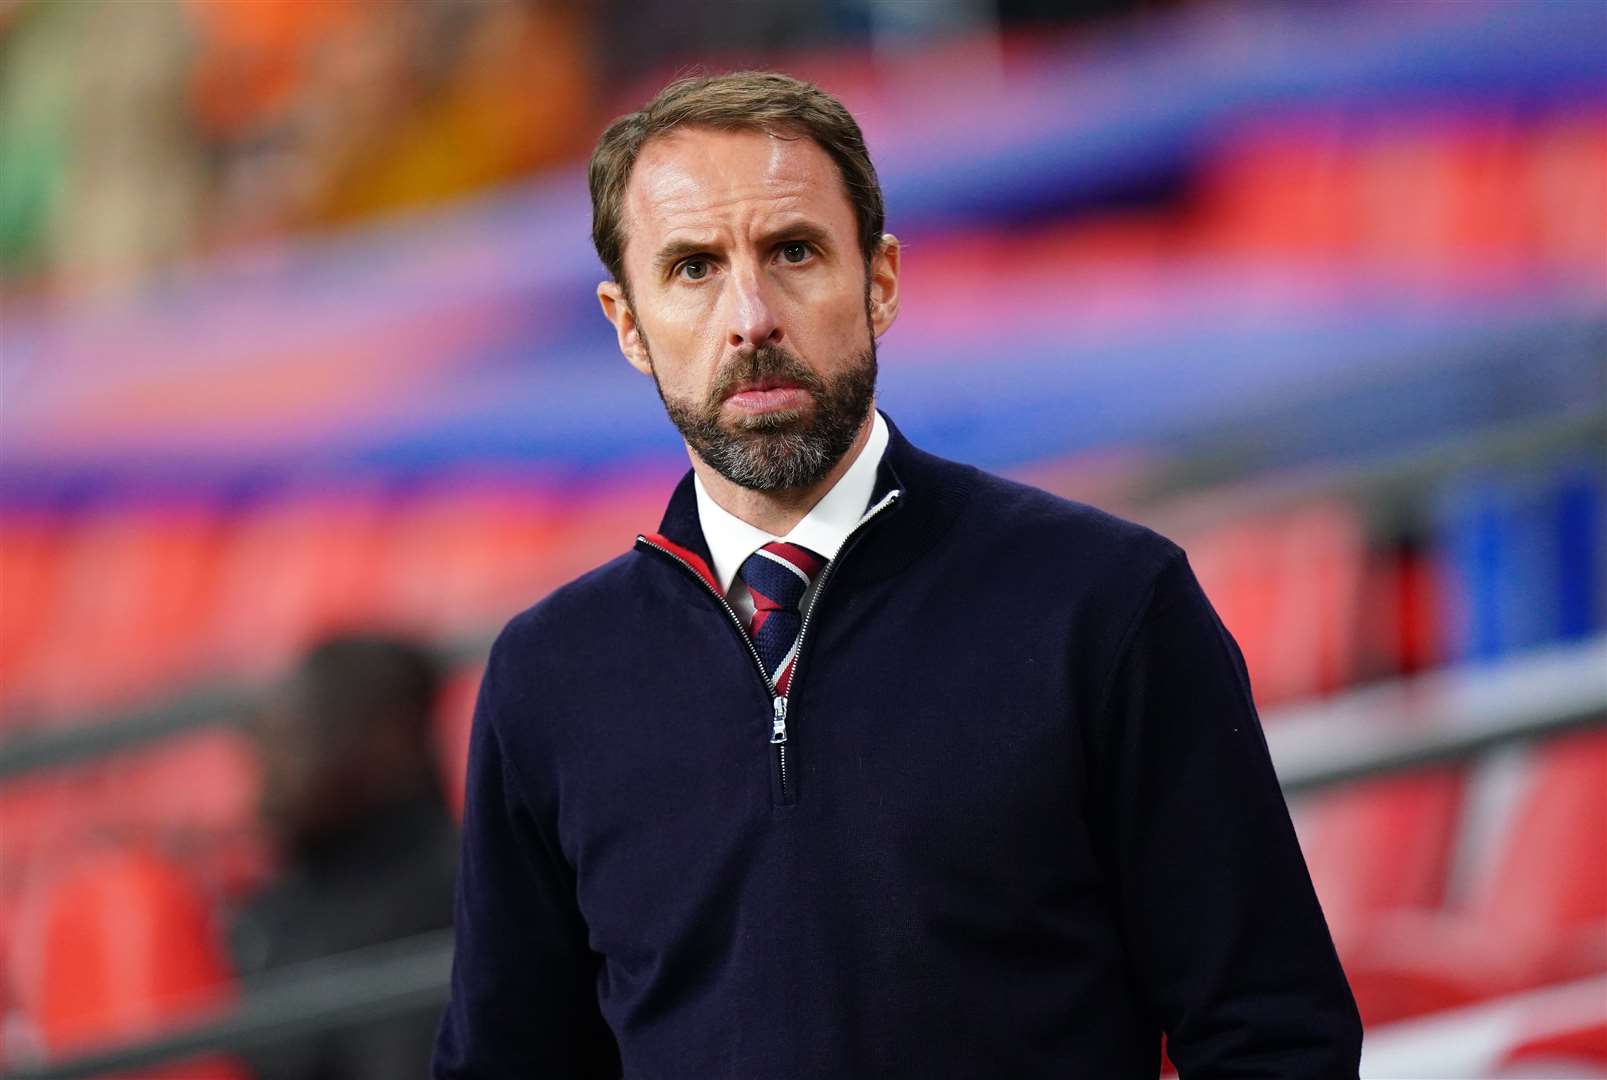 Gareth Southgate’s England team have earned their place at the World Cup in Qatar (Adam Davy/PA)